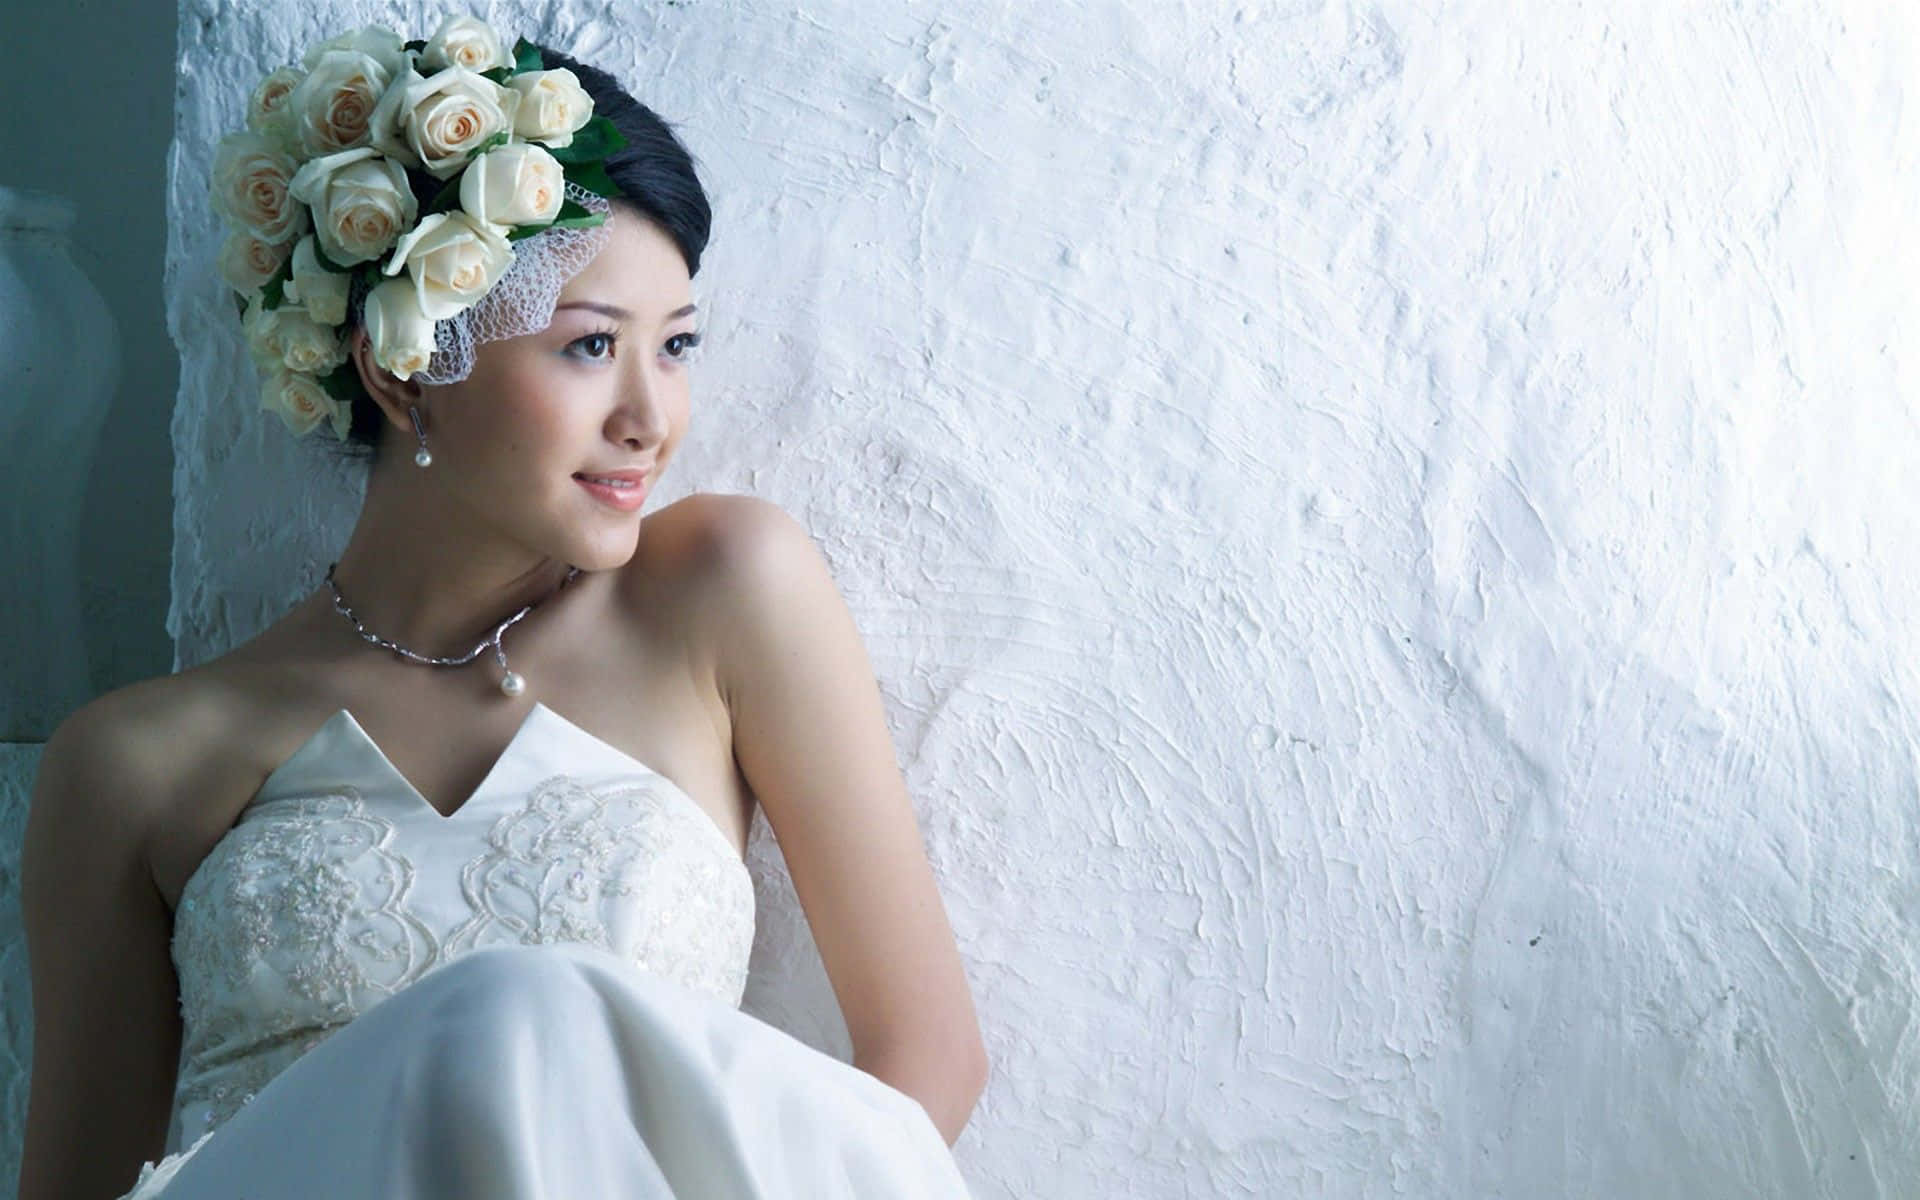 Elegant Bride in Stunning Gown and Floral Wreath